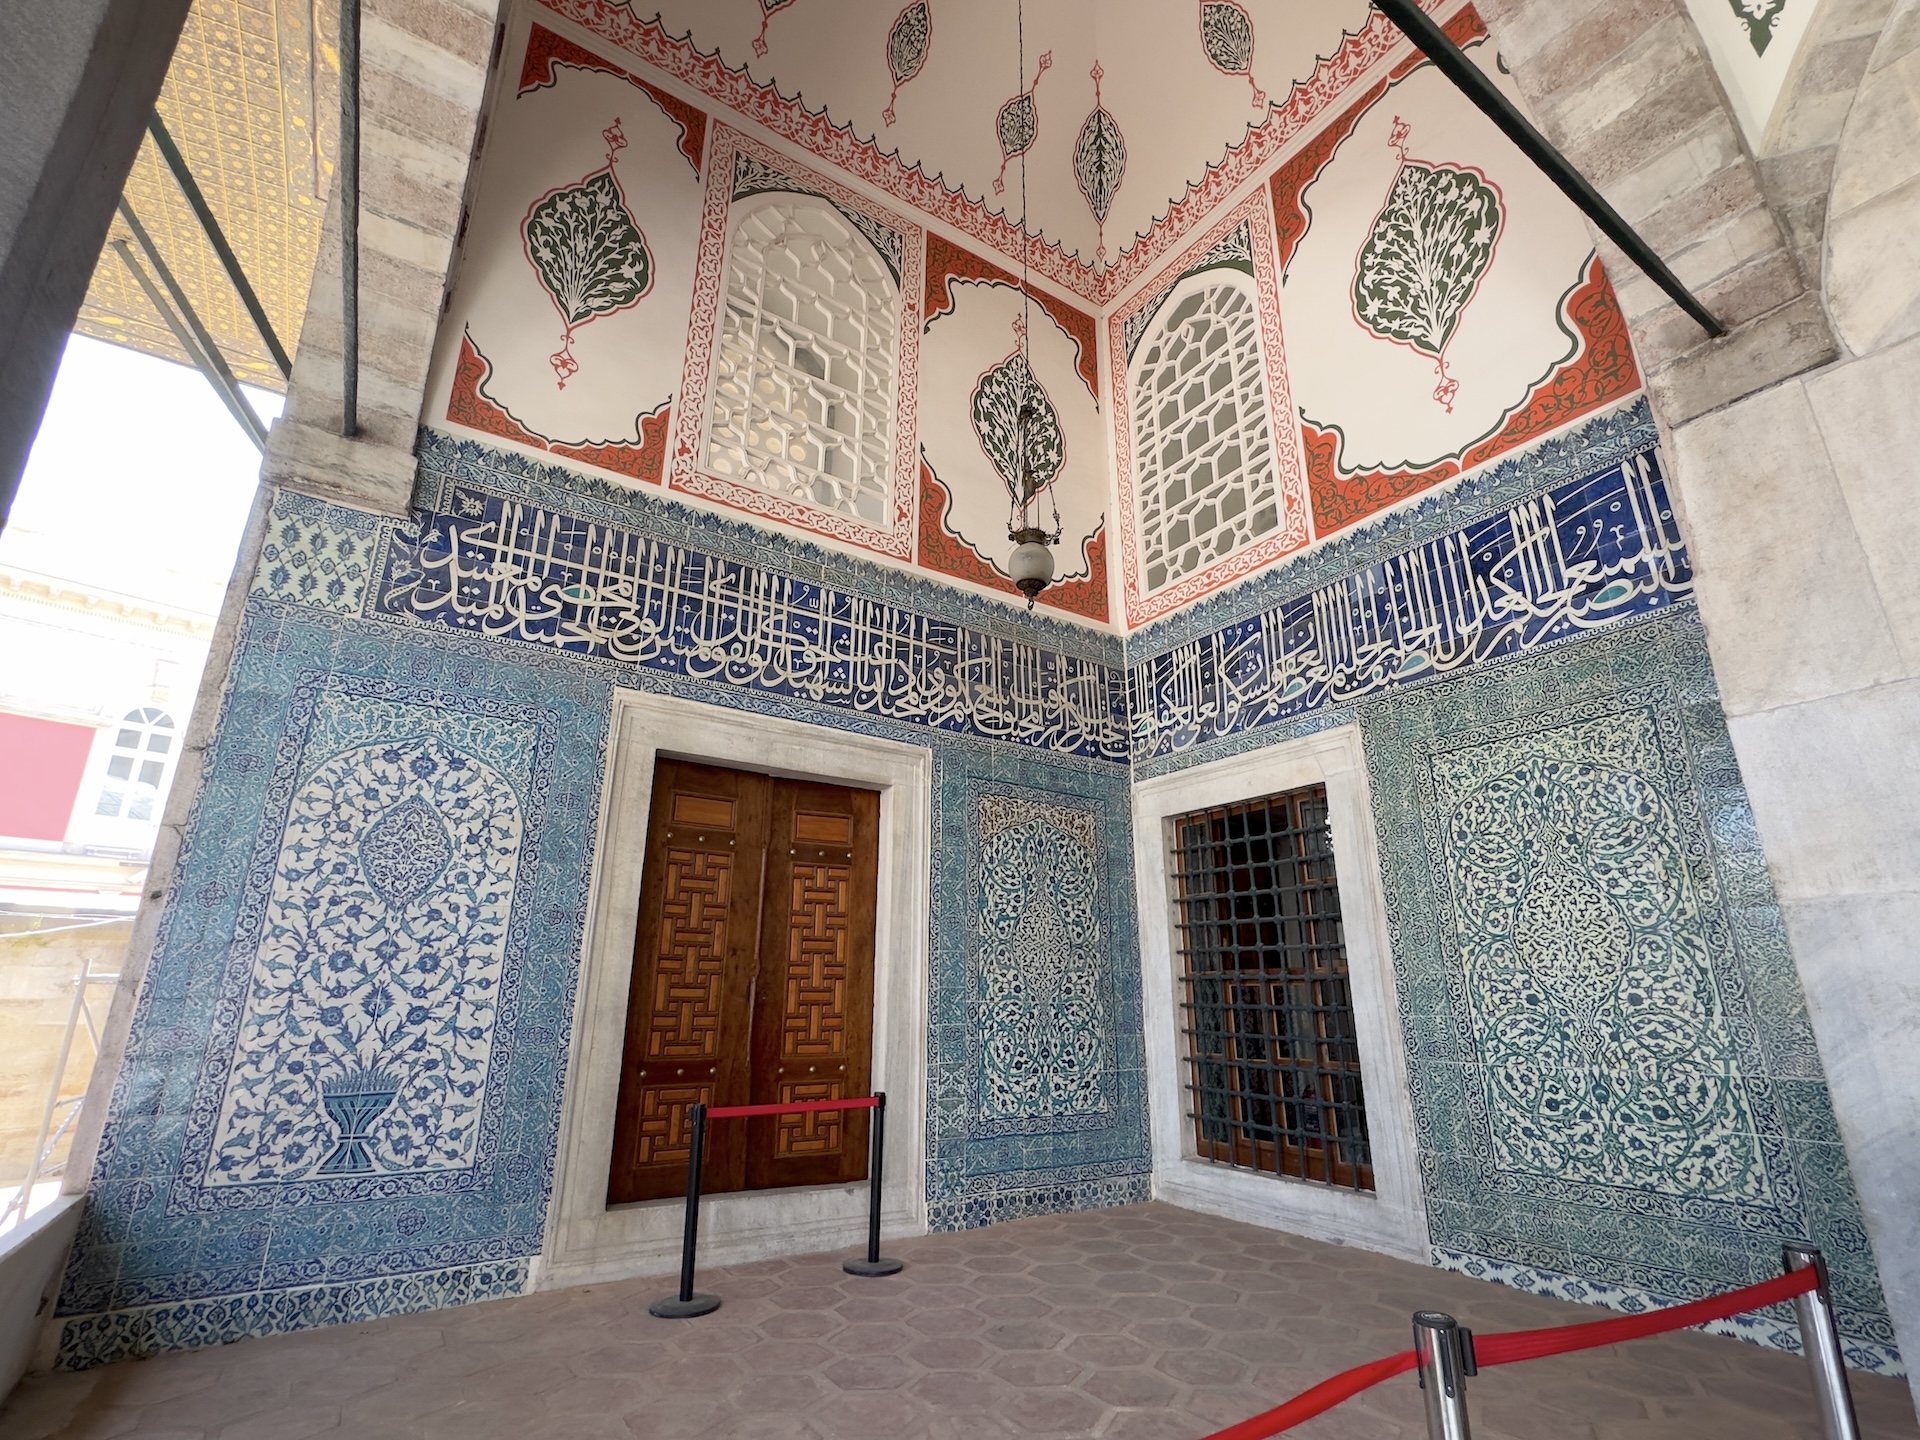 Iznik tiles on the porch at the Tomb of Turhan Hatice Sultan